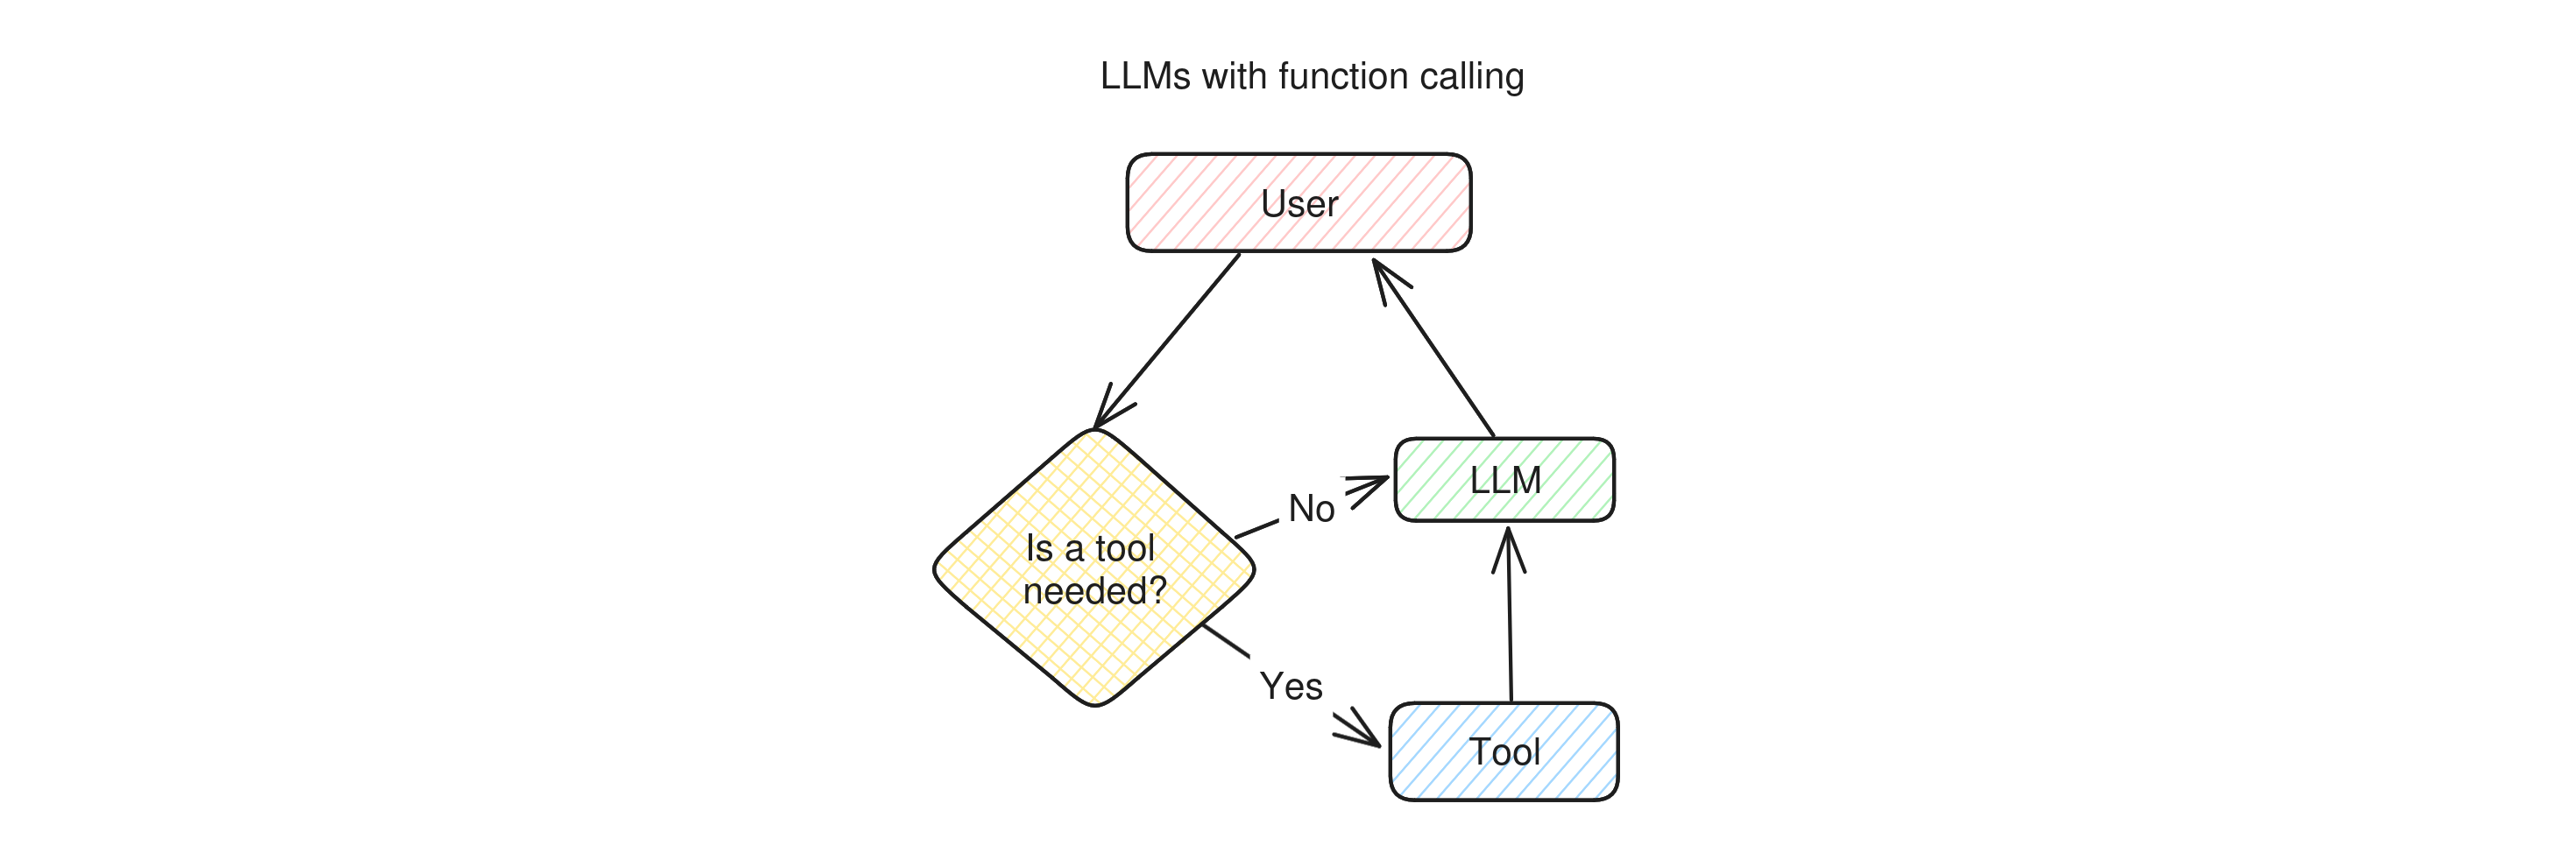 Diagram of the operation of an LLM with function calling: when a user asks a question, the LLM first needs to decide whether it should use a tool to answer the question. If it decides that a tool is needed, it calls it, otherwise it skips directly to generating a reply, which is then sent back to the user.